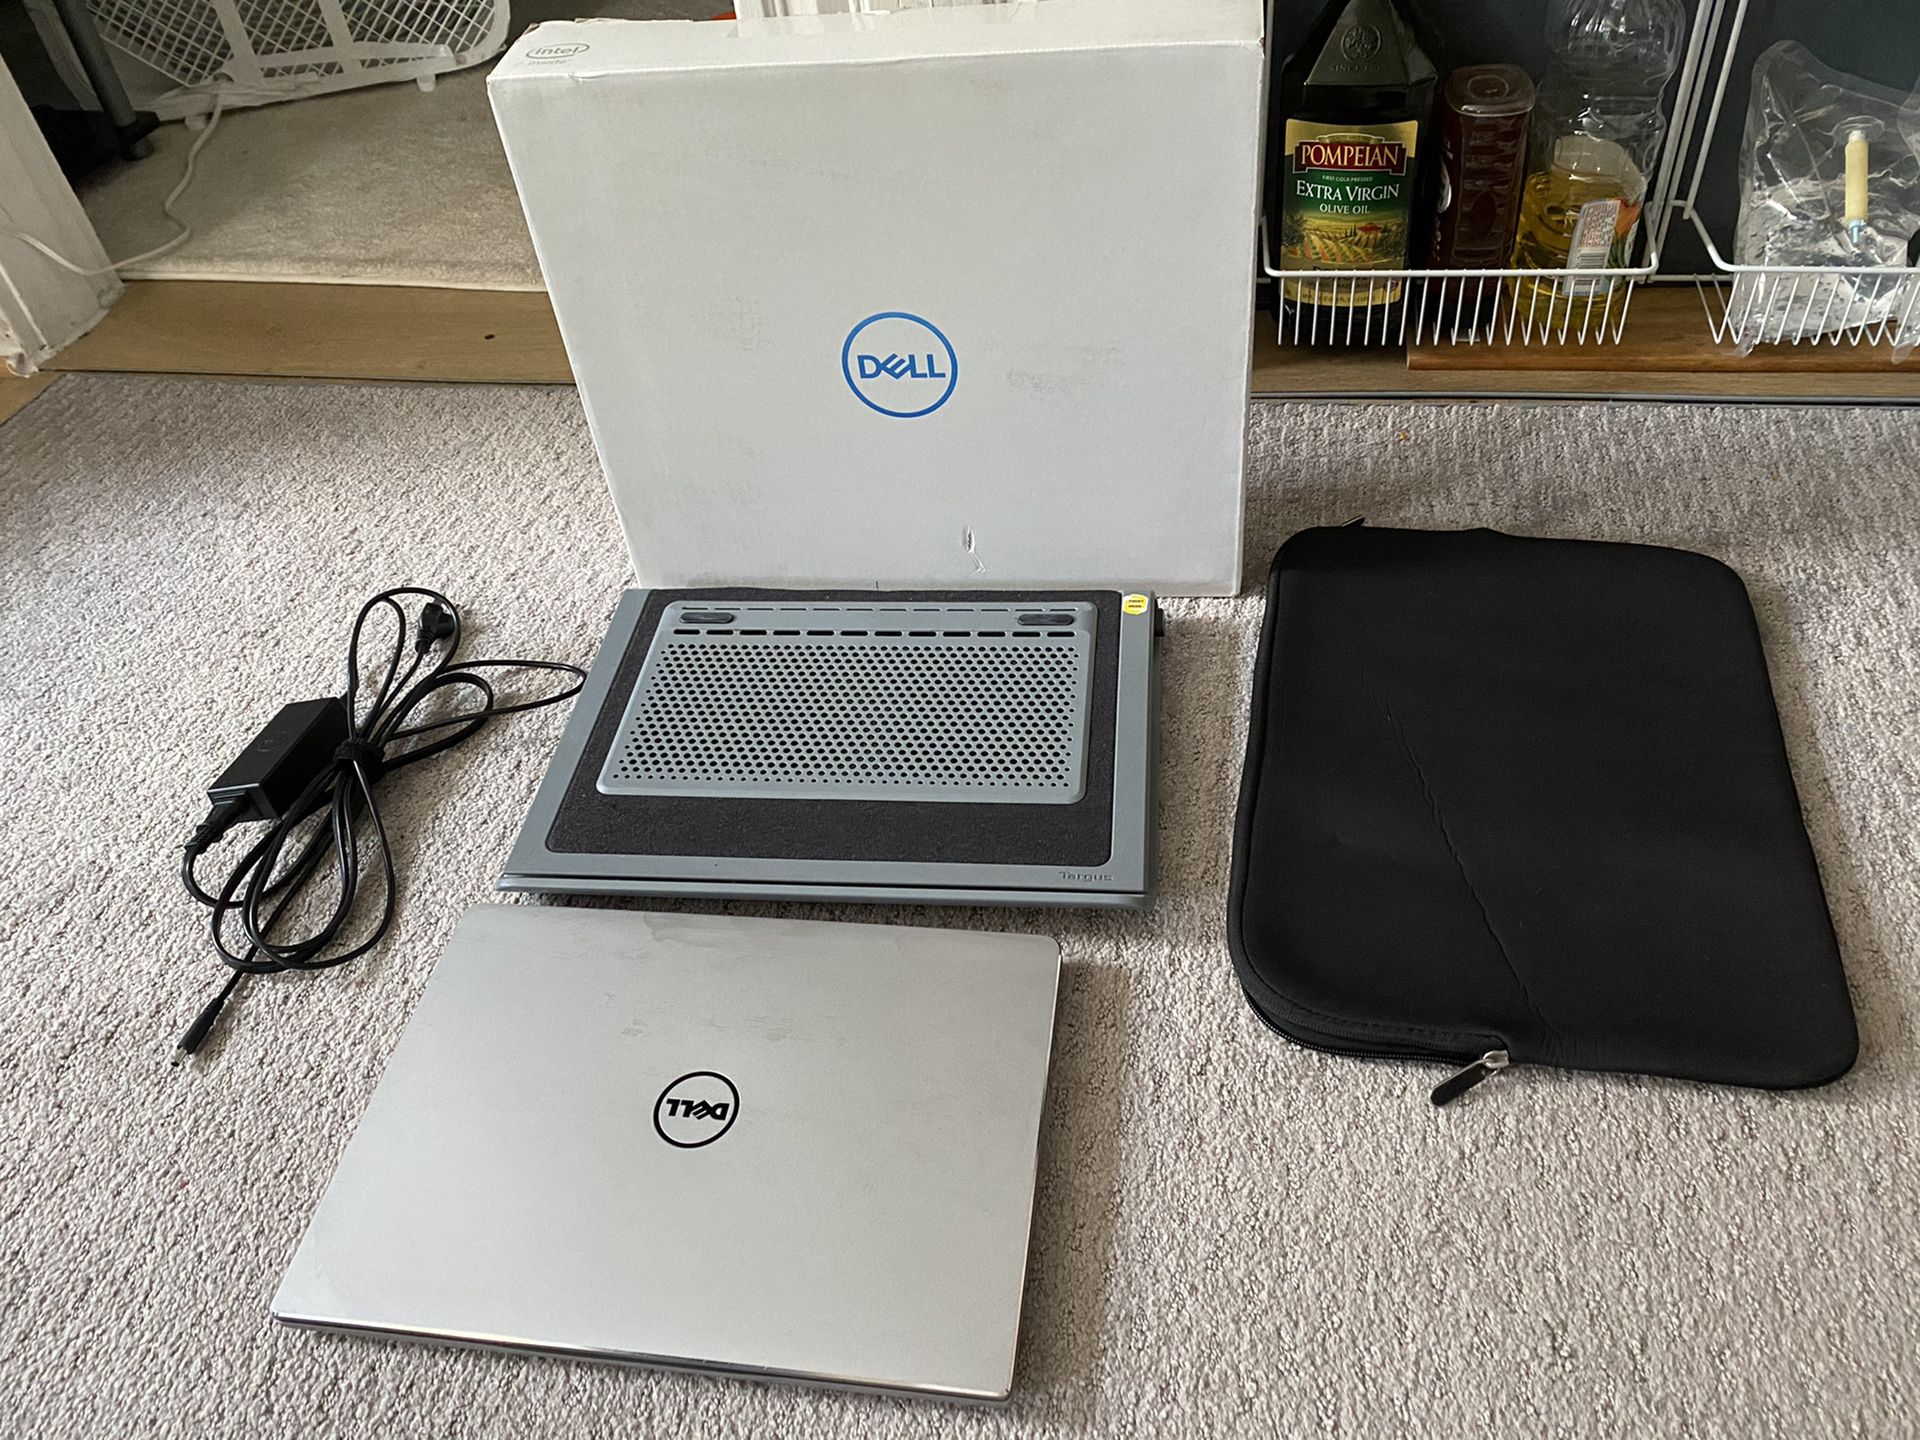 Dell Inspiron 14 inch 7000 series laptop